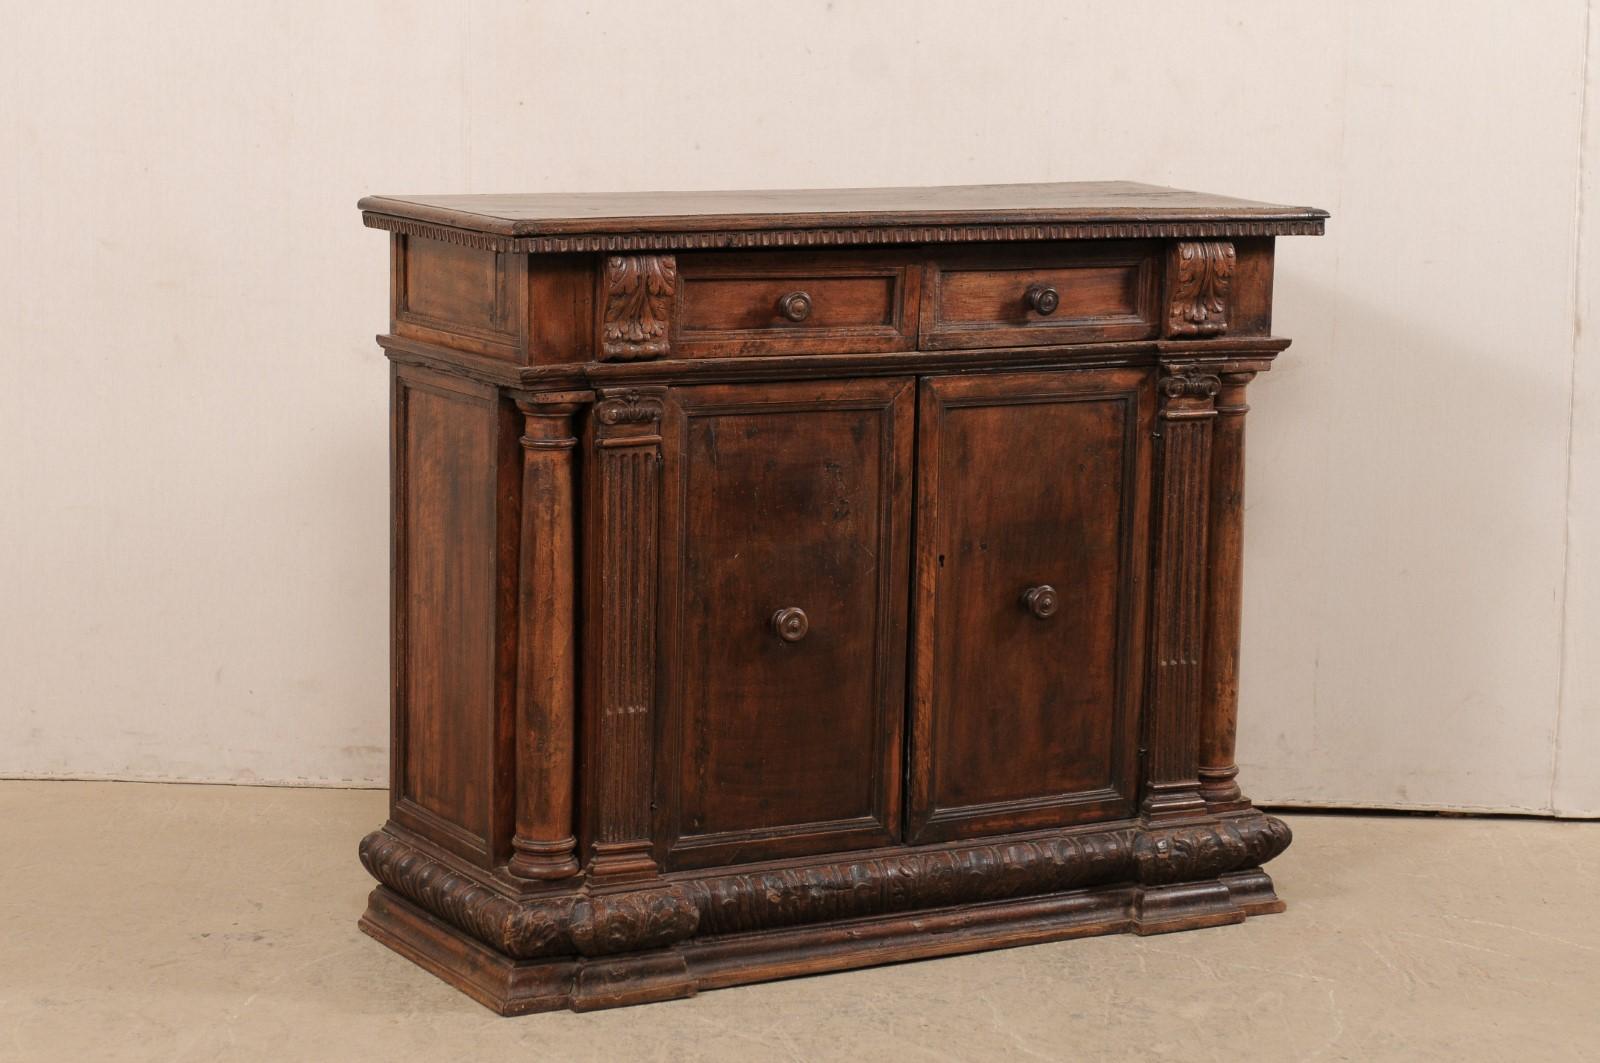 An Italian beautifully-carved walnut cabinet from the early 19th century, possibly older. This antique walnut buffet from Italy features a rectangular-shaped top with a carved egg-n-dart trim under it's perimeter edges. Raised acanthus leaf carvings